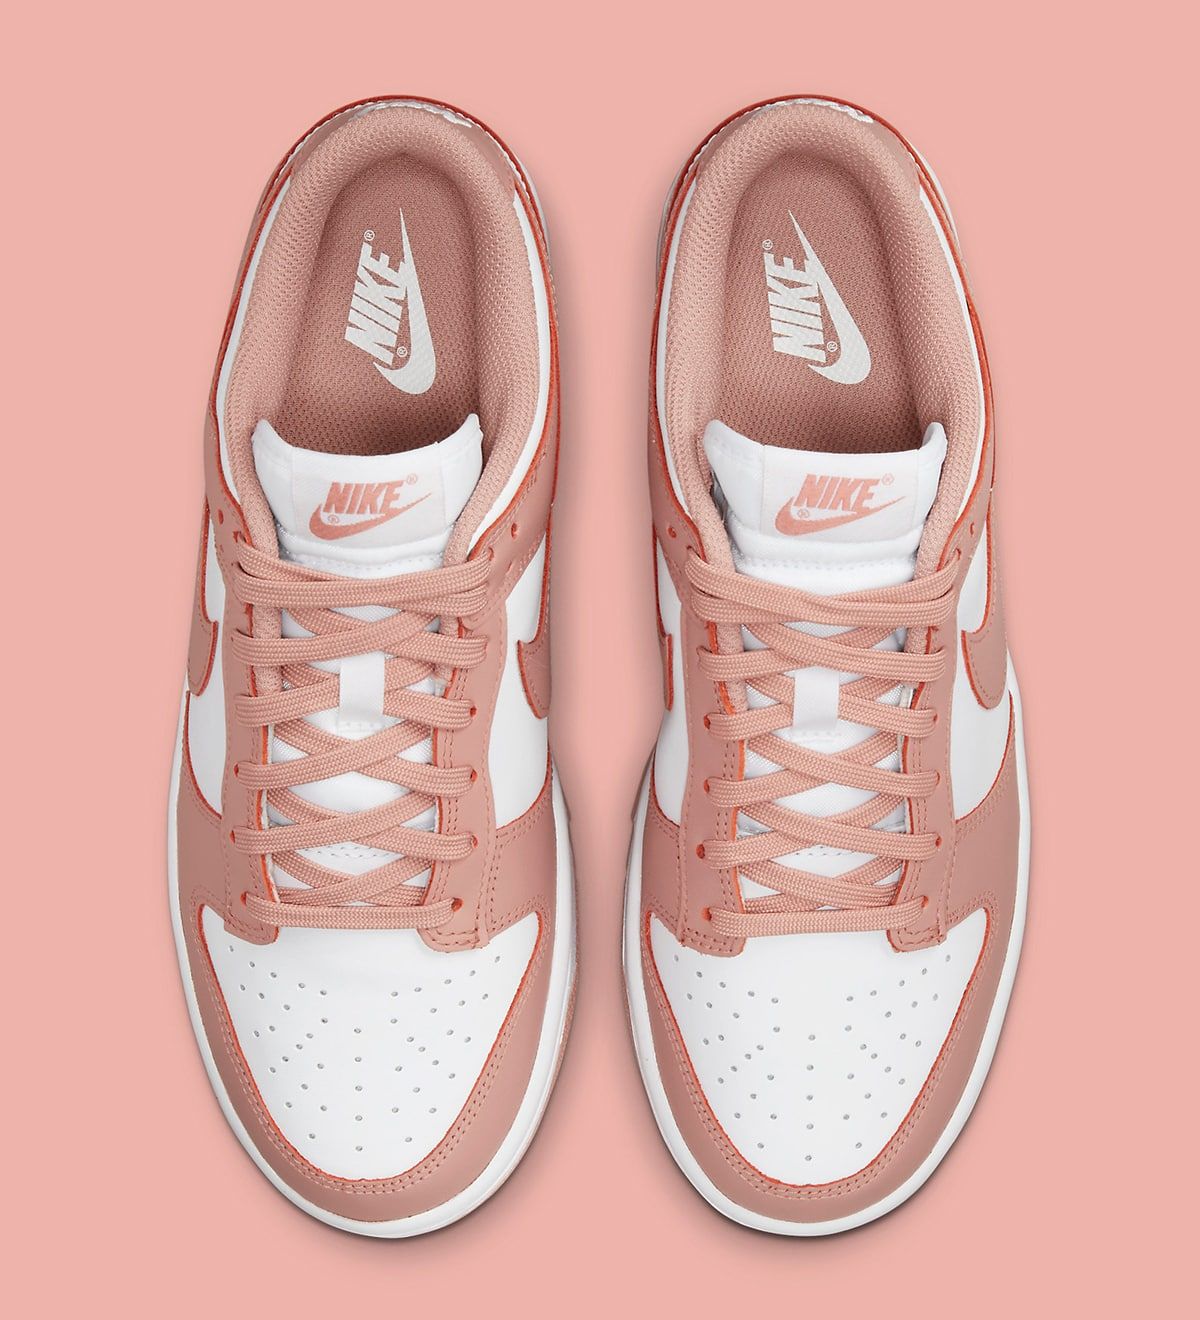 Where to Buy the Nike Dunk Low “Rose Whisper” | House of Heat°